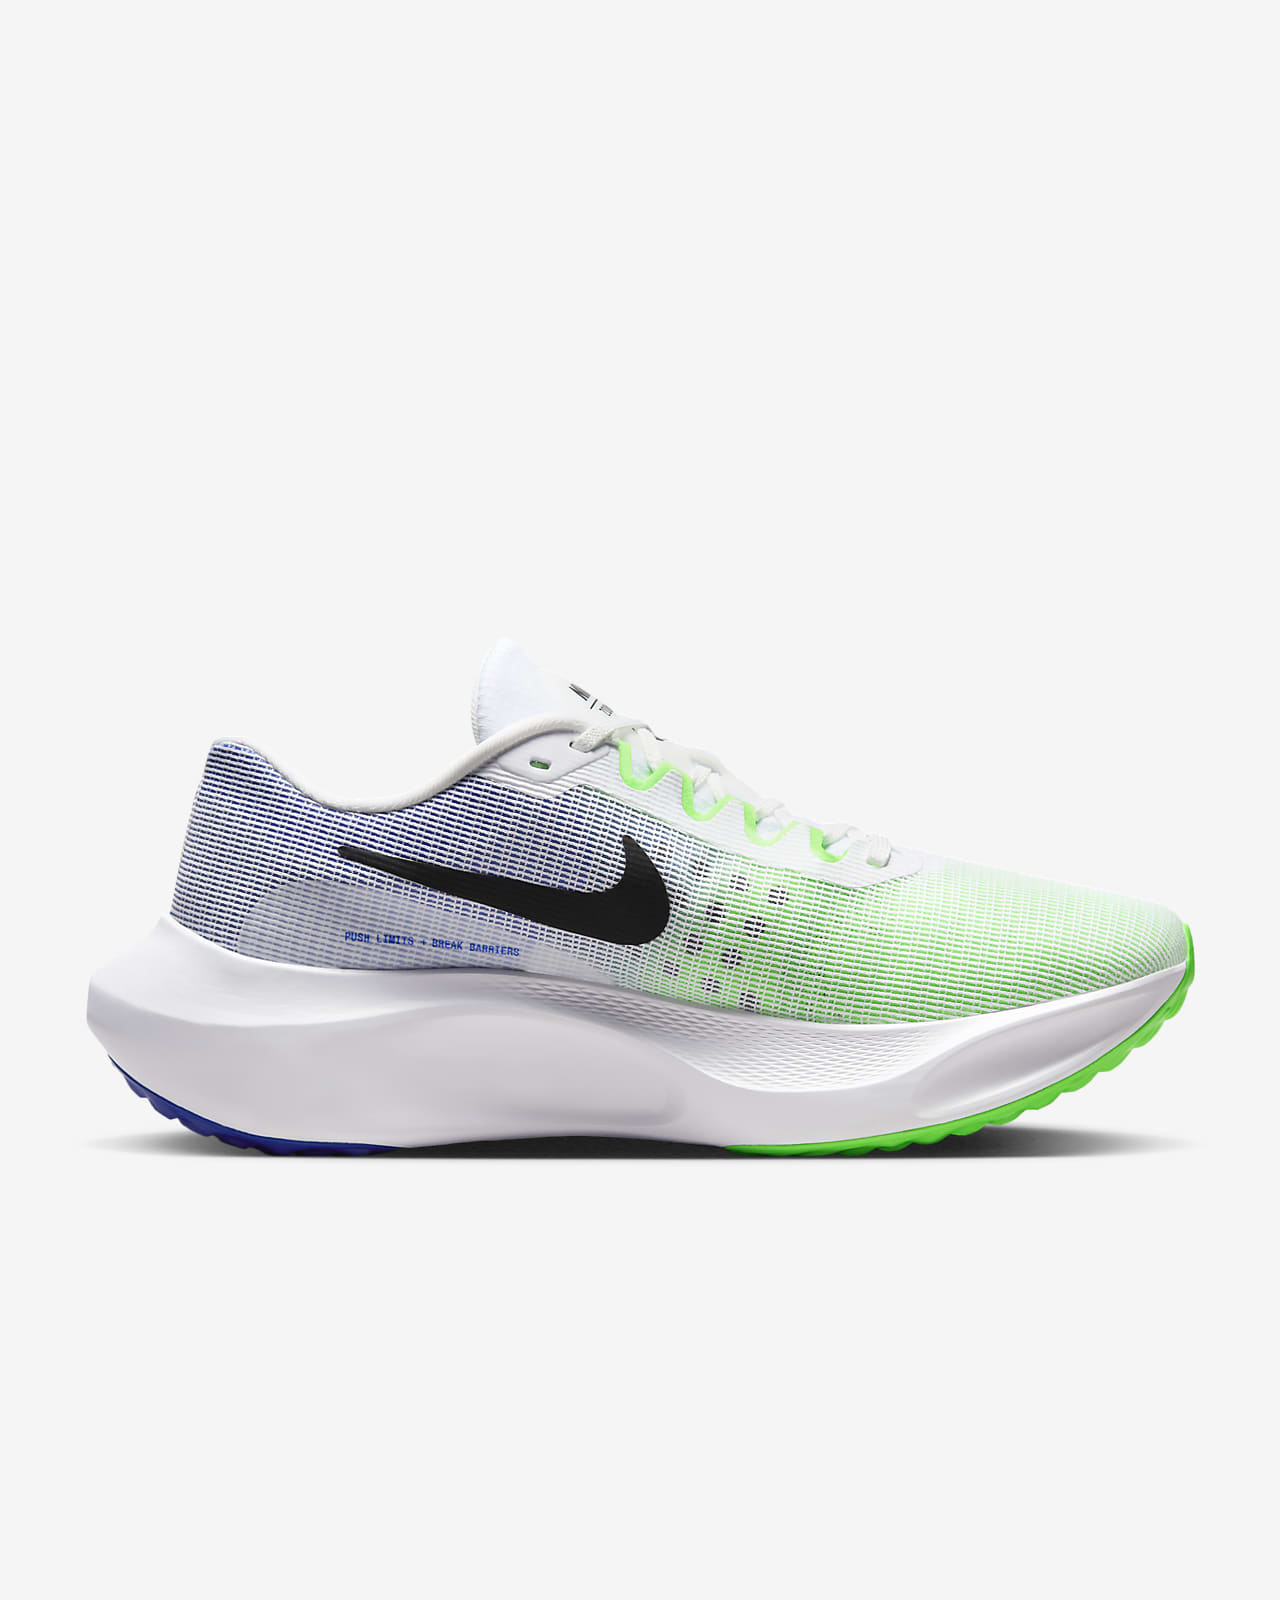 Nike Zoom Fly 5 Men's Road Running Shoes